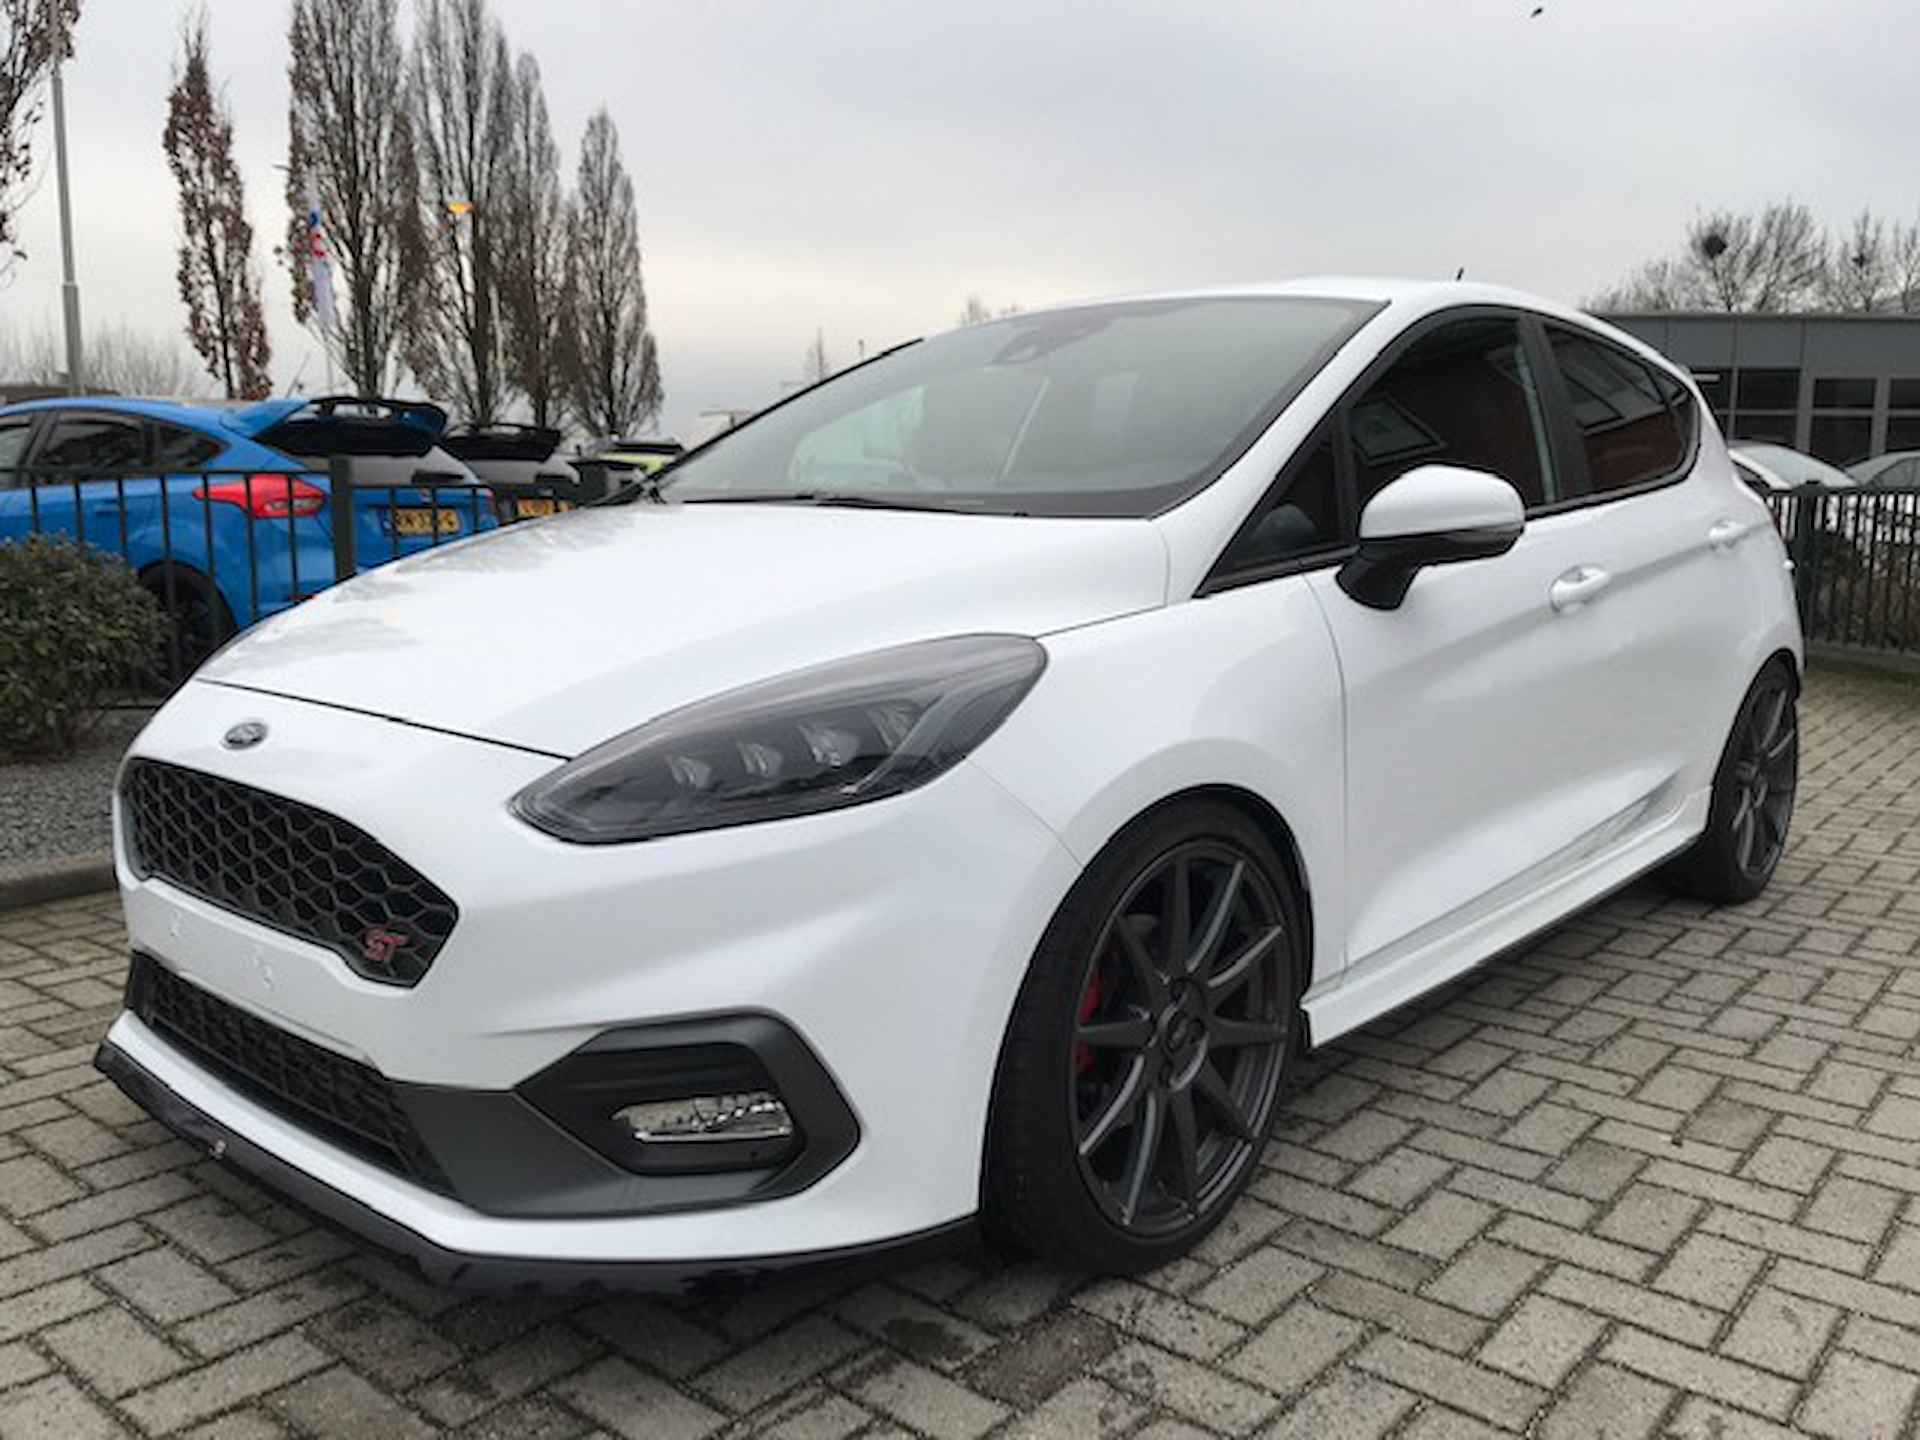 Ford Fiesta 1.5 EcoBoost ST-3 Mountune 235 PK Performance - 1/11